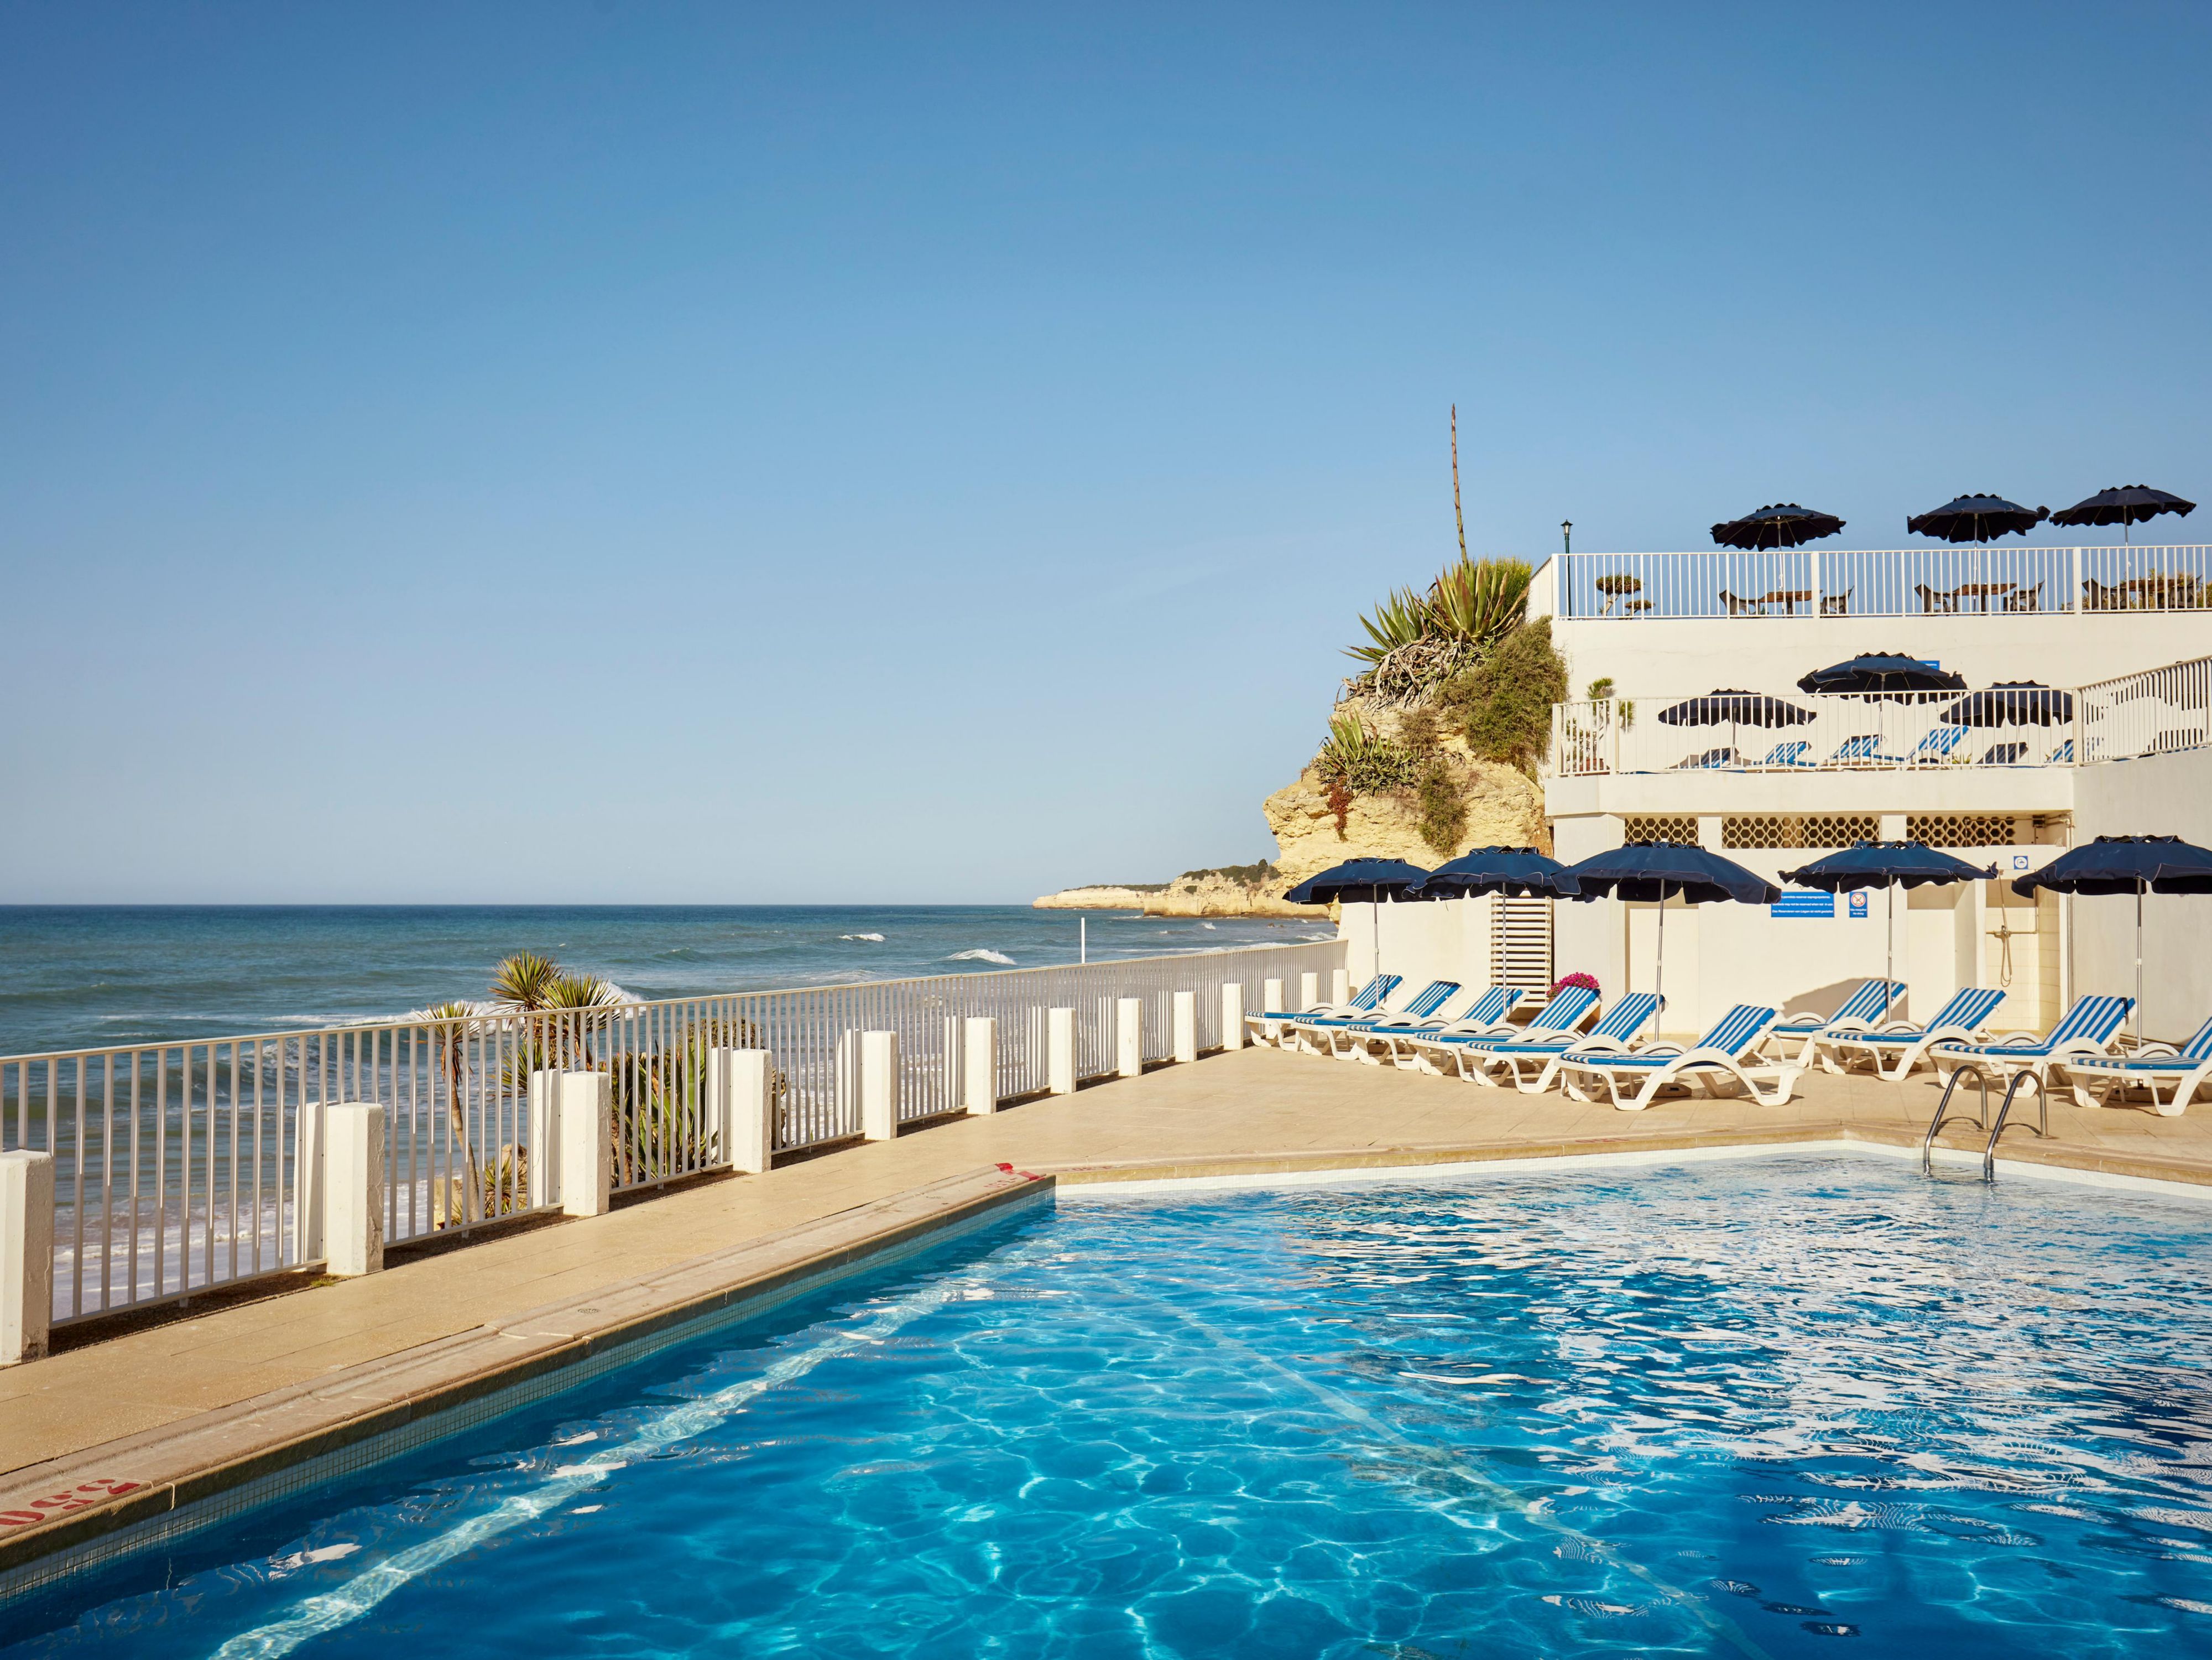 Not only are we right on the beach, we have a stunning outdoor pool - overlooking the beach.